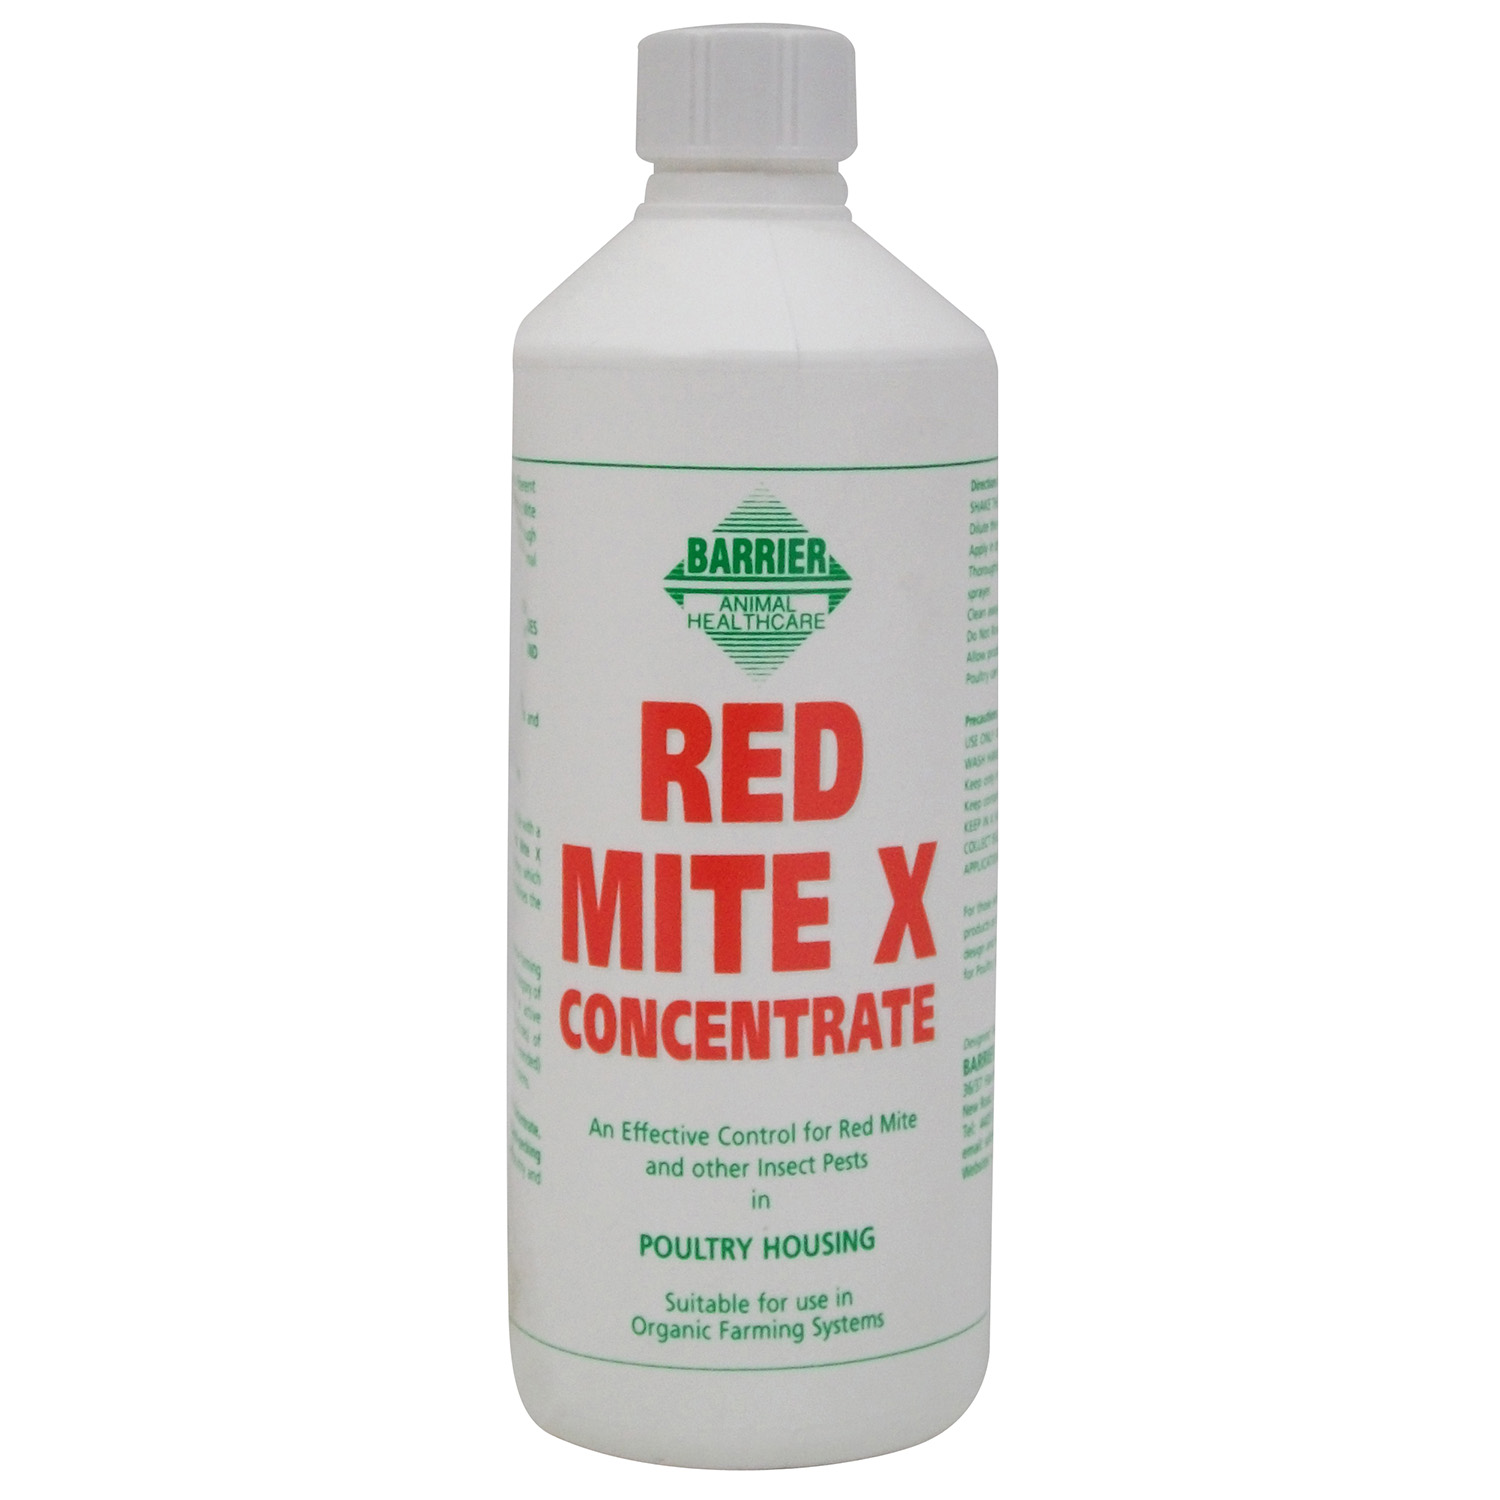 BARRIER RED MITE X CONCENTRATE BARRIER RED MITE X CONCENTRATE